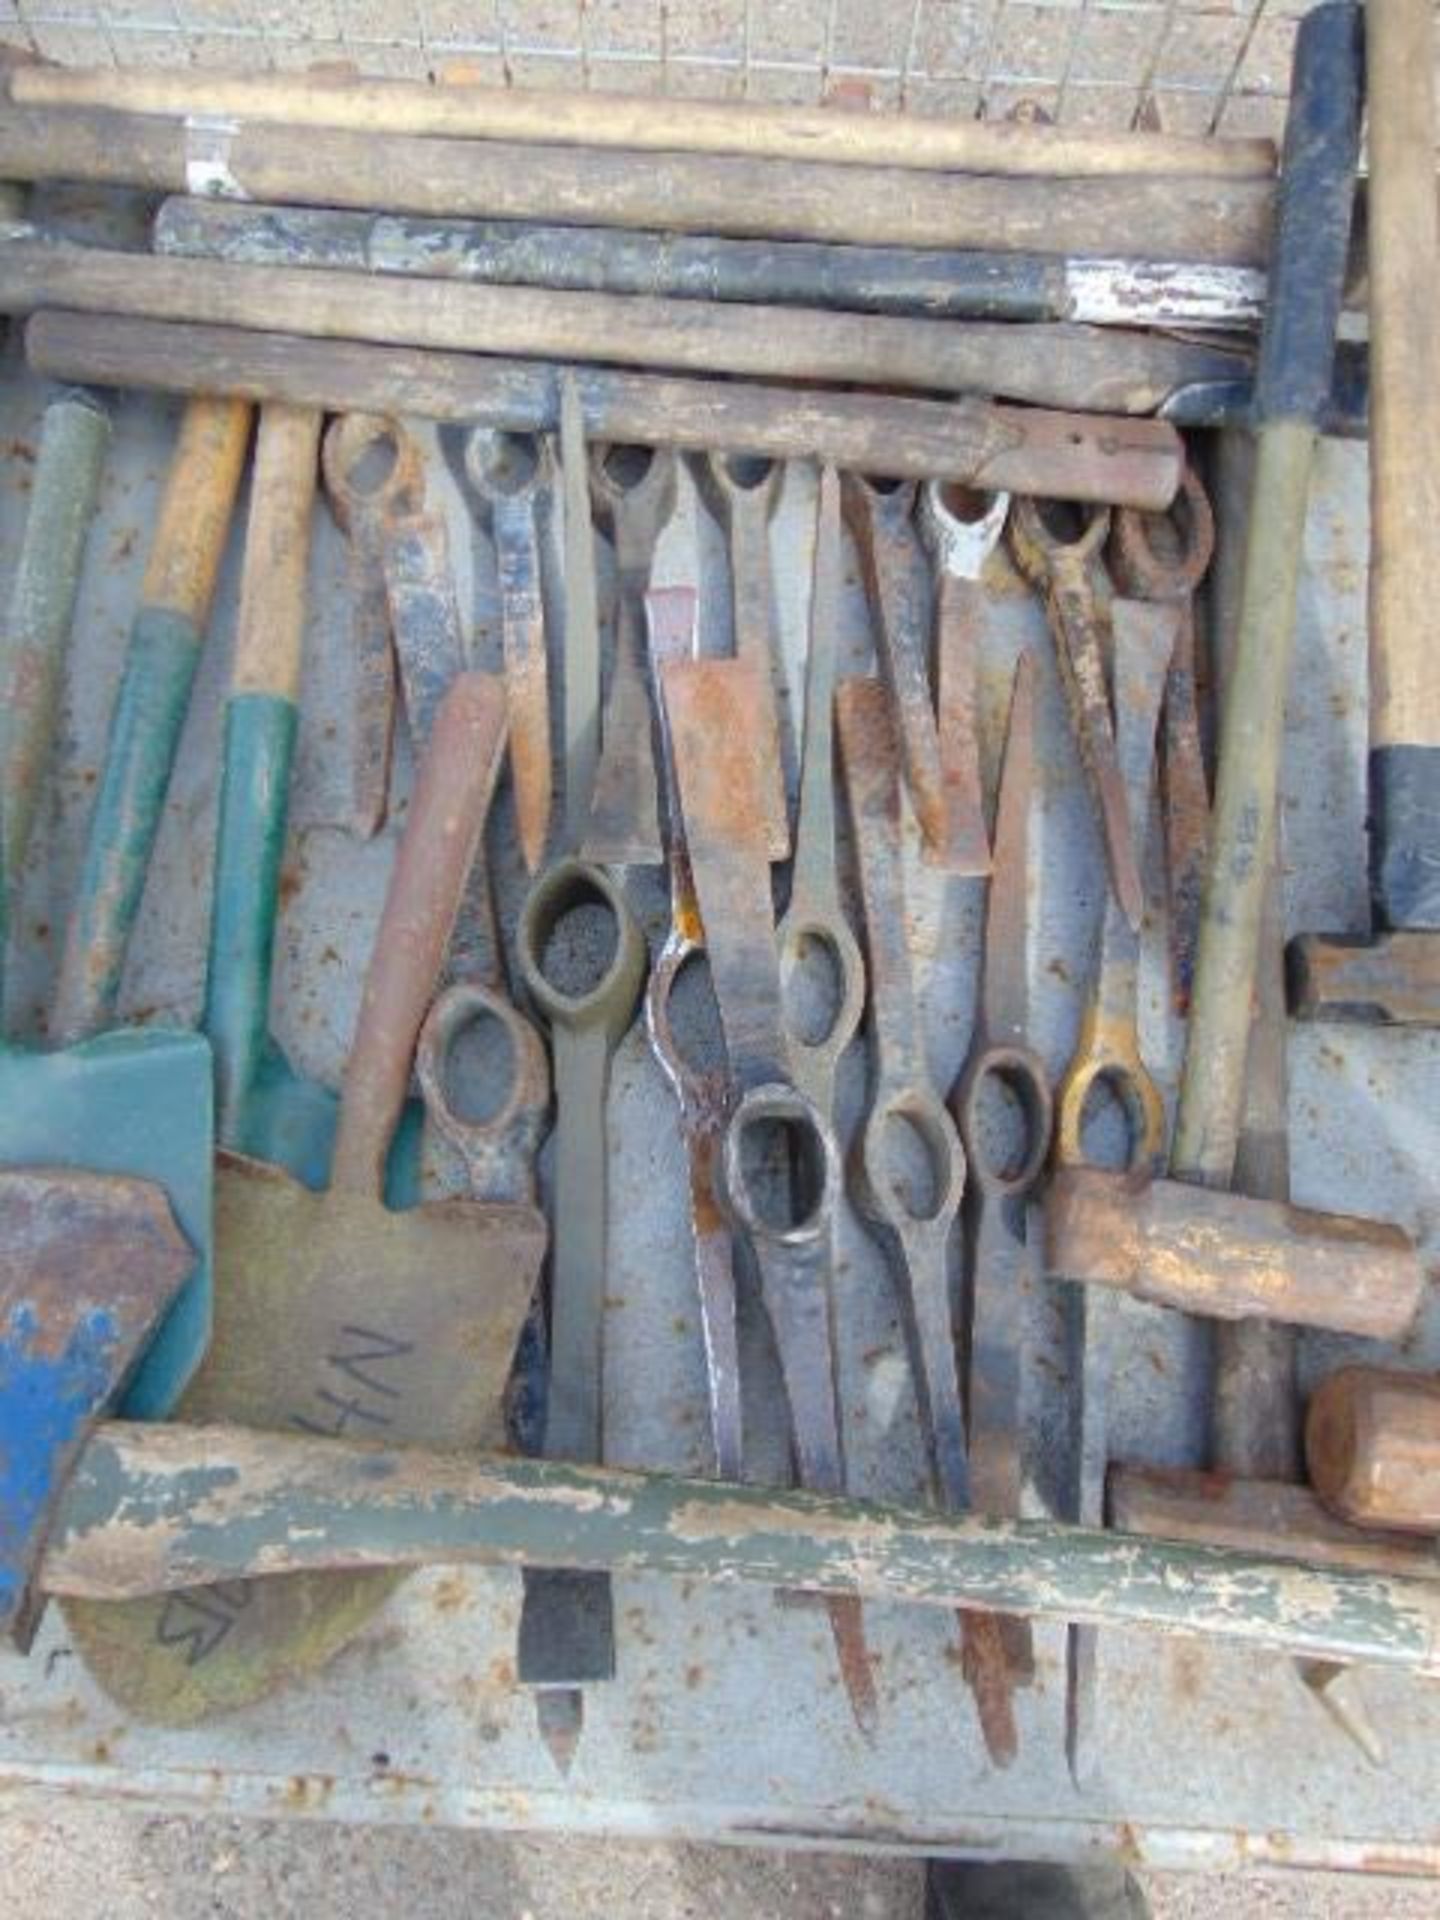 Stillage of Shovels, Picks. Hammers and Axe - Image 3 of 4